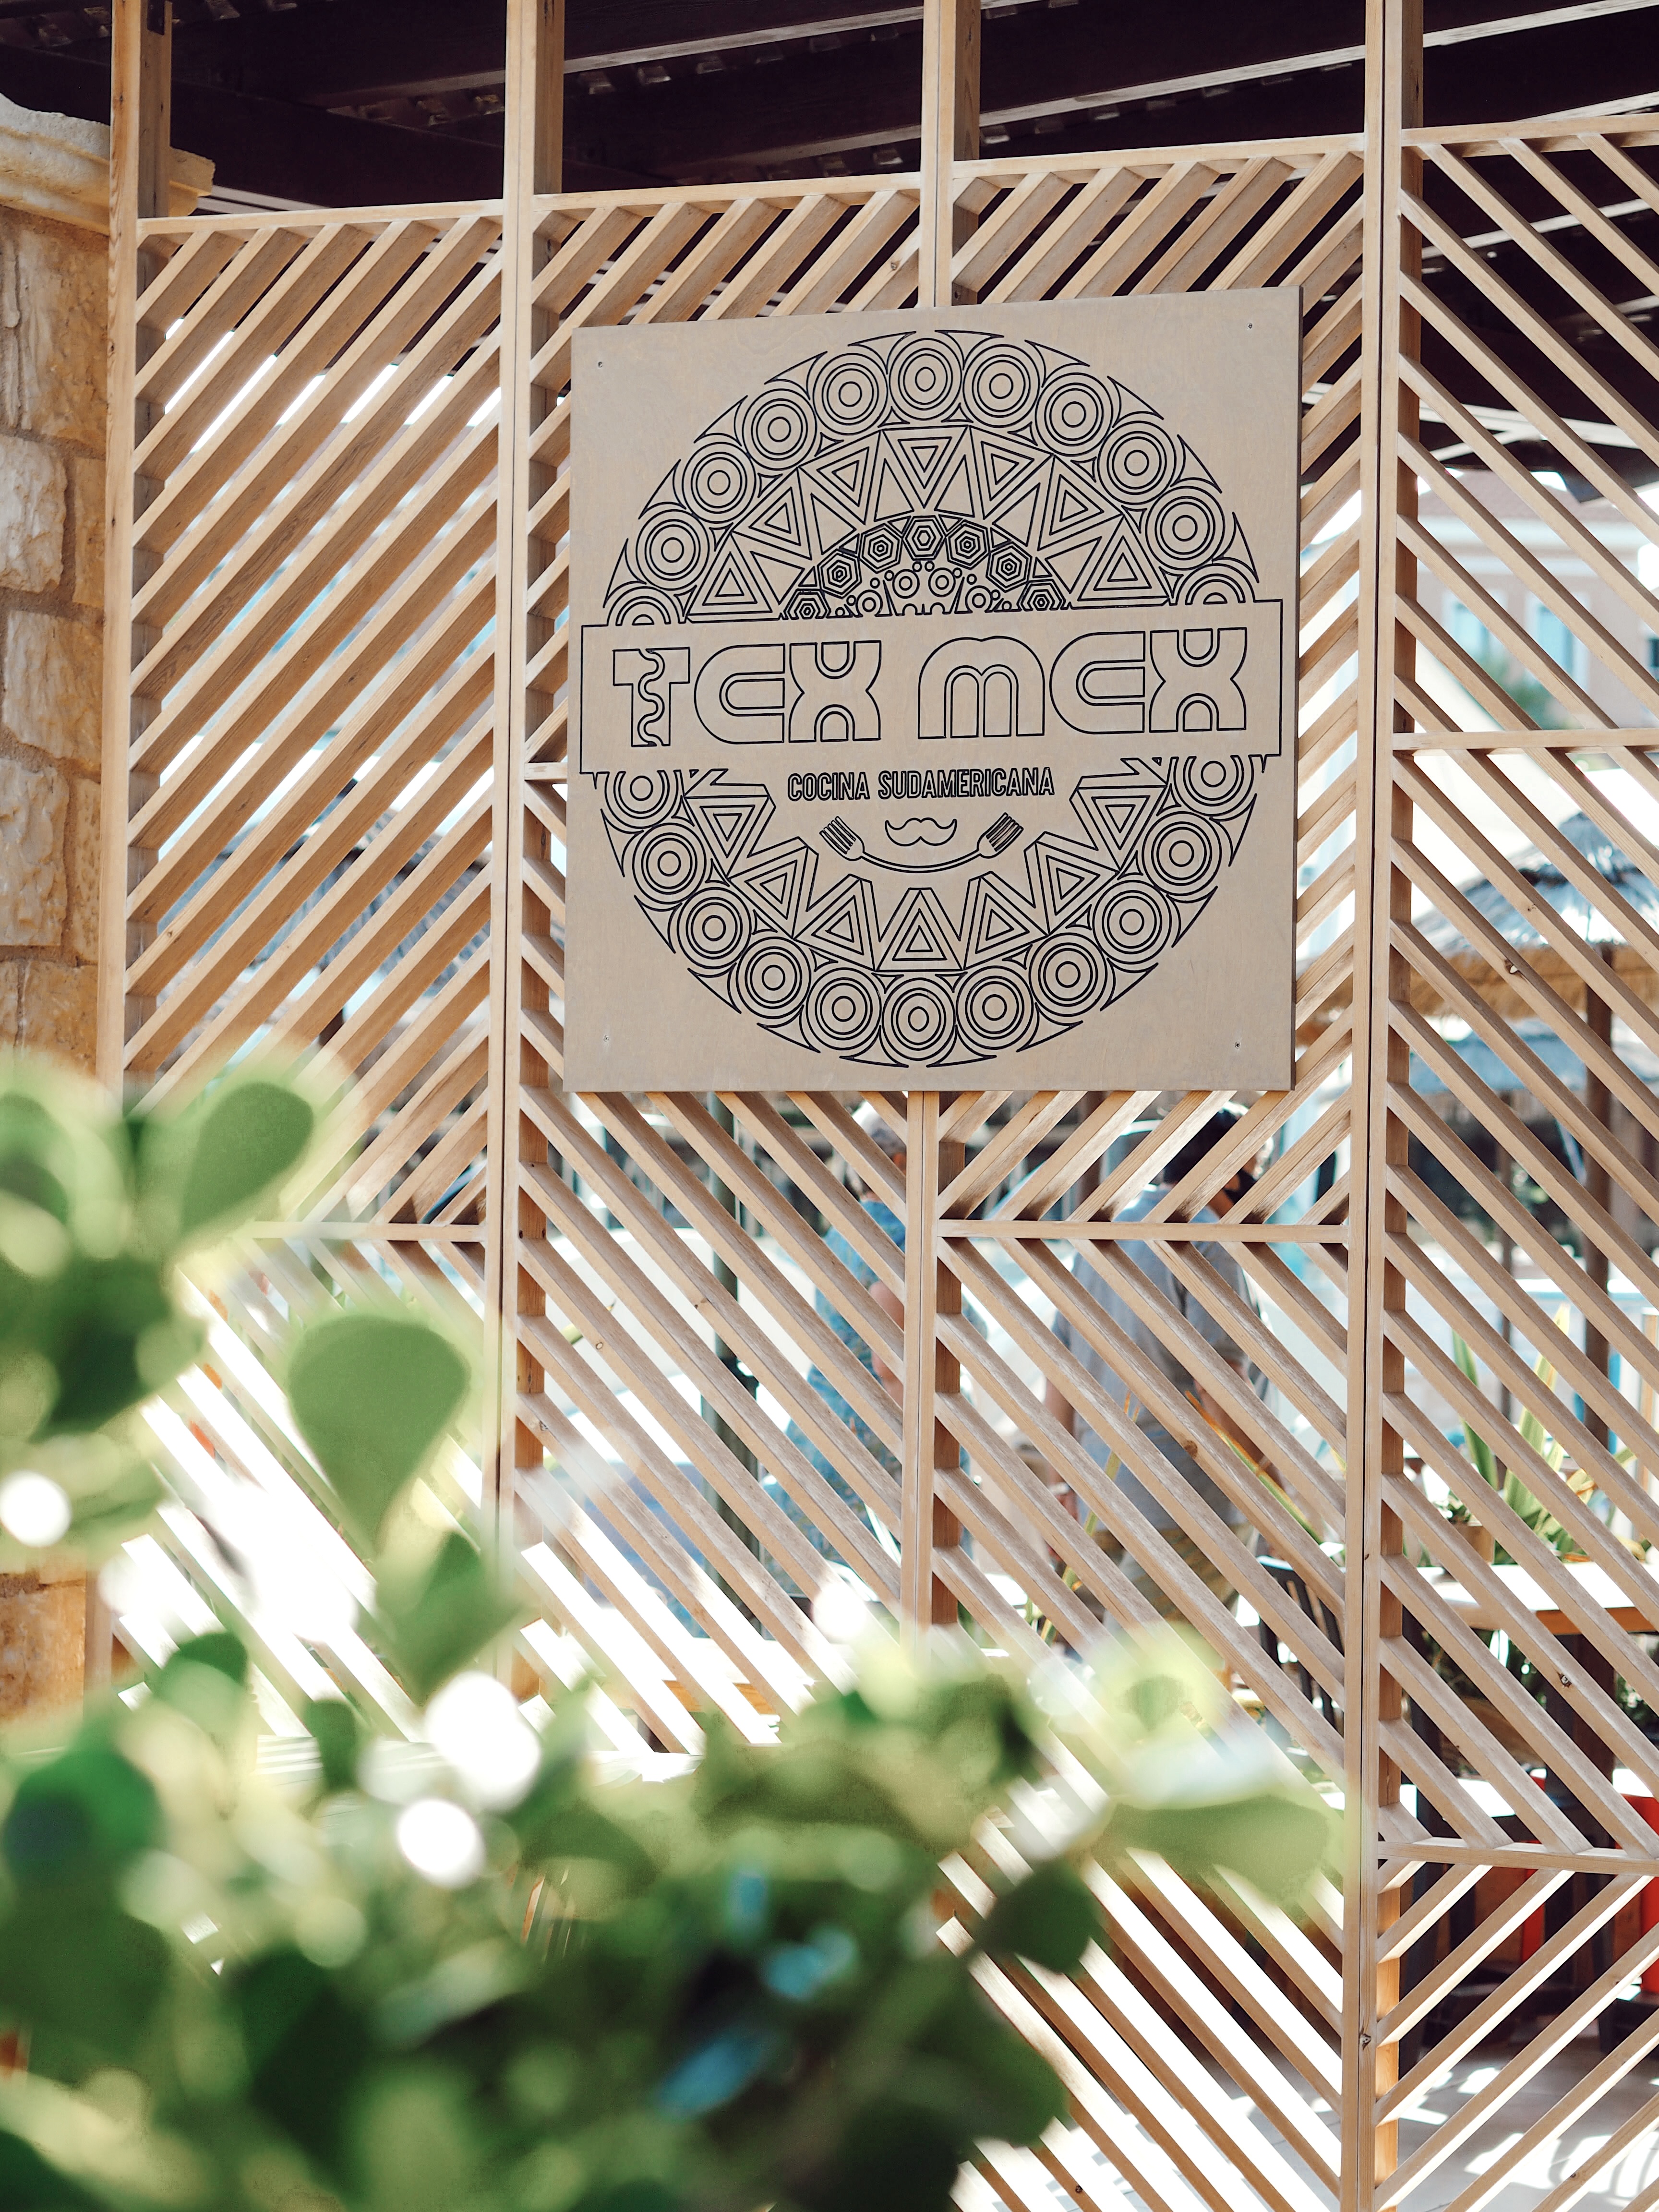 A sign reading 'Tex Mex' at one of the restaurants at the Atlantica Caldera Palace in Crete, Greece.